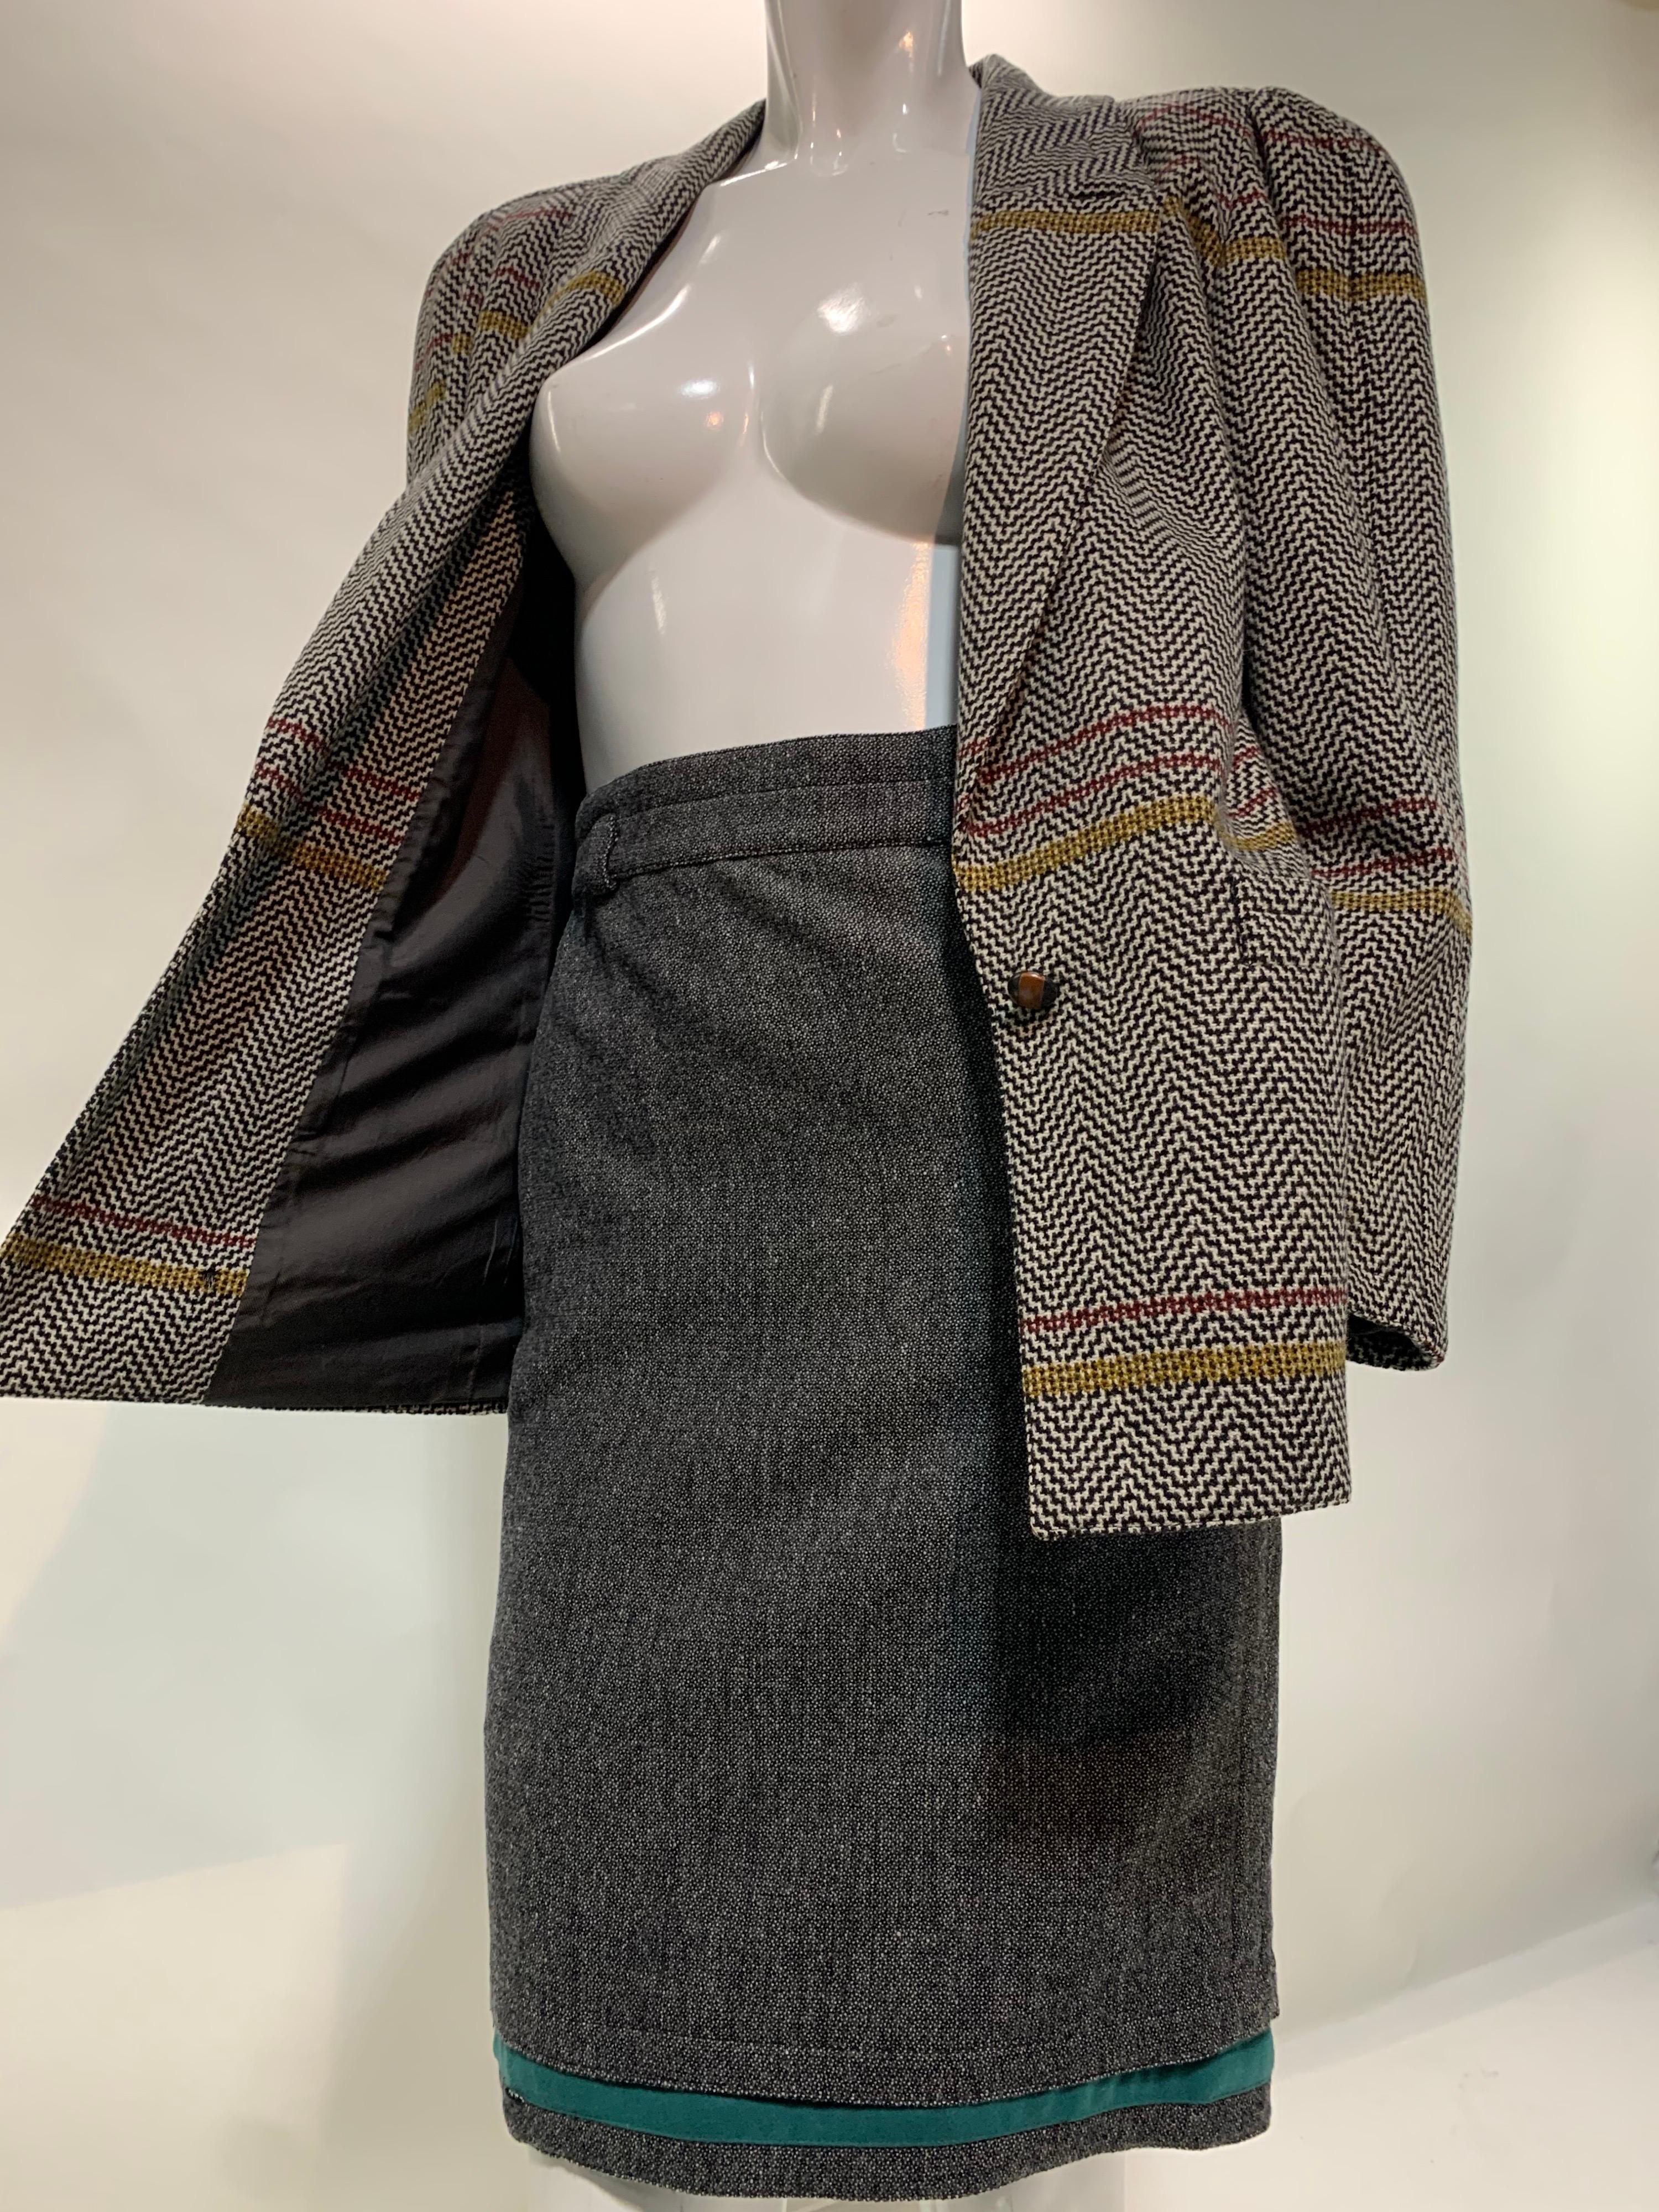 1980 Gianni Versace Mixed Tweed Skirt Suit w/ Structured Shoulder Silhouette For Sale 6